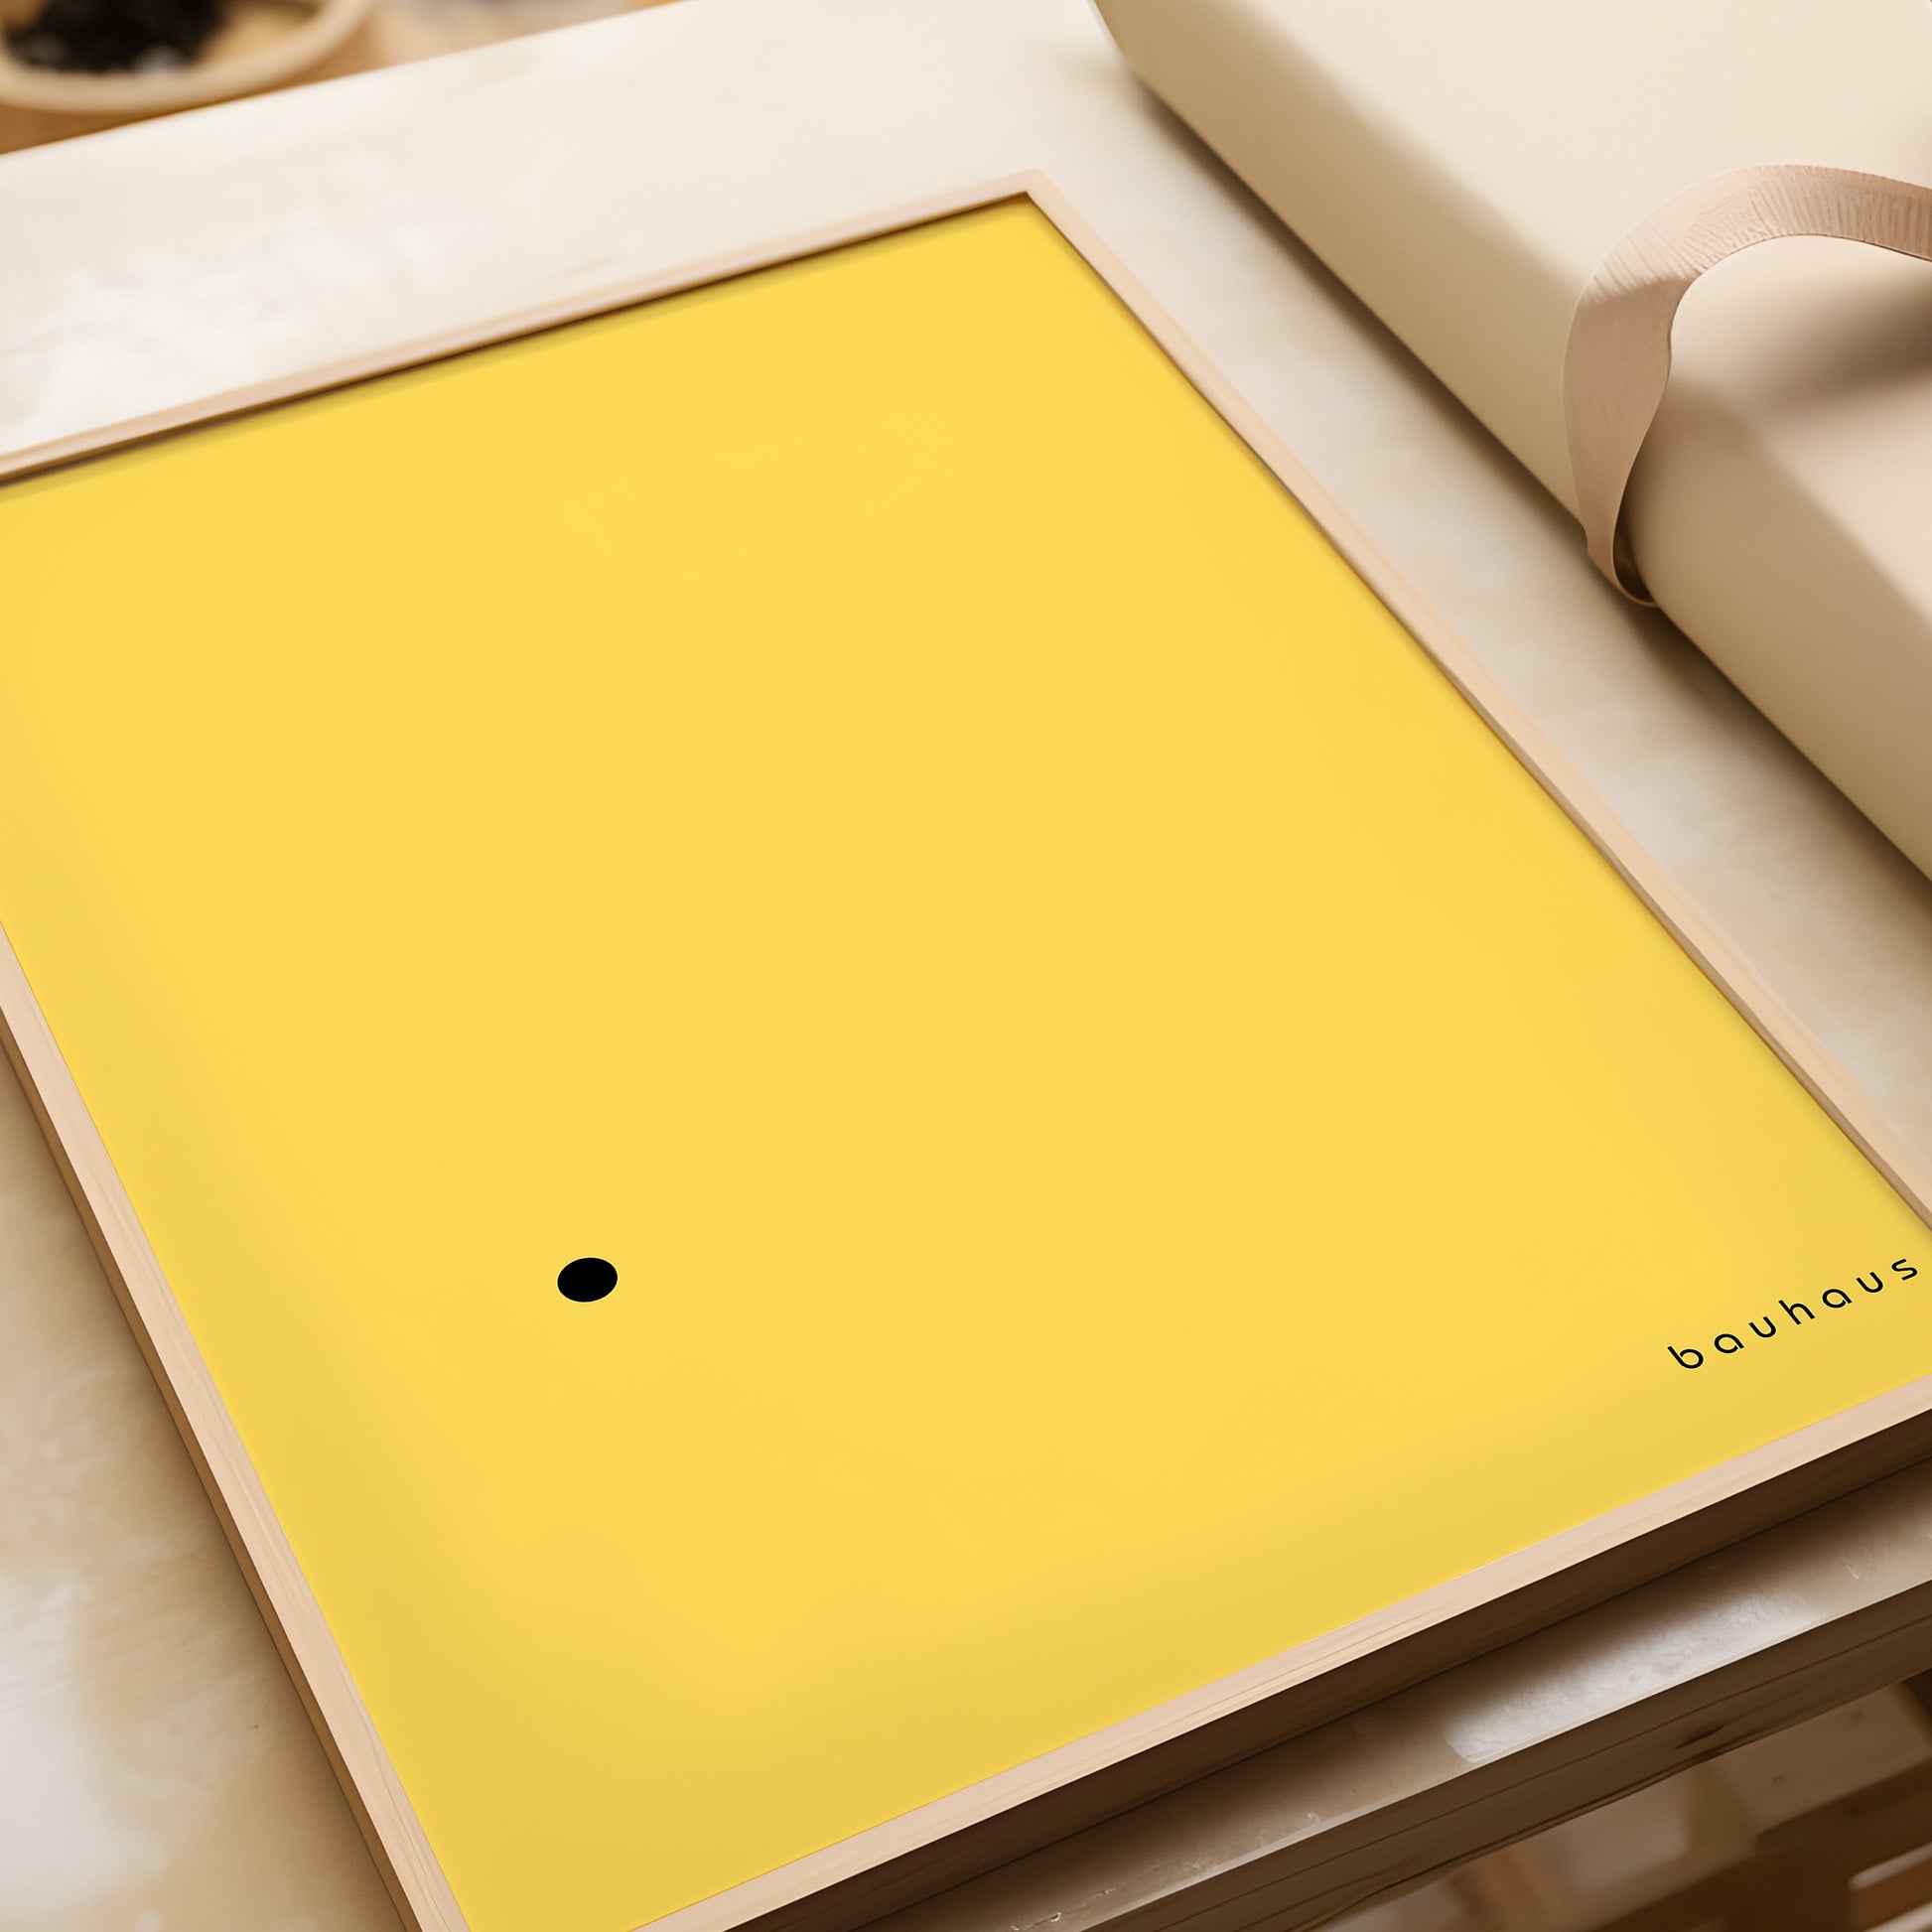 Bauhaus - The Dot | Minimalist Mid-Century Modern Poster in Yellow and Black (available framed ready to hang or unframed)